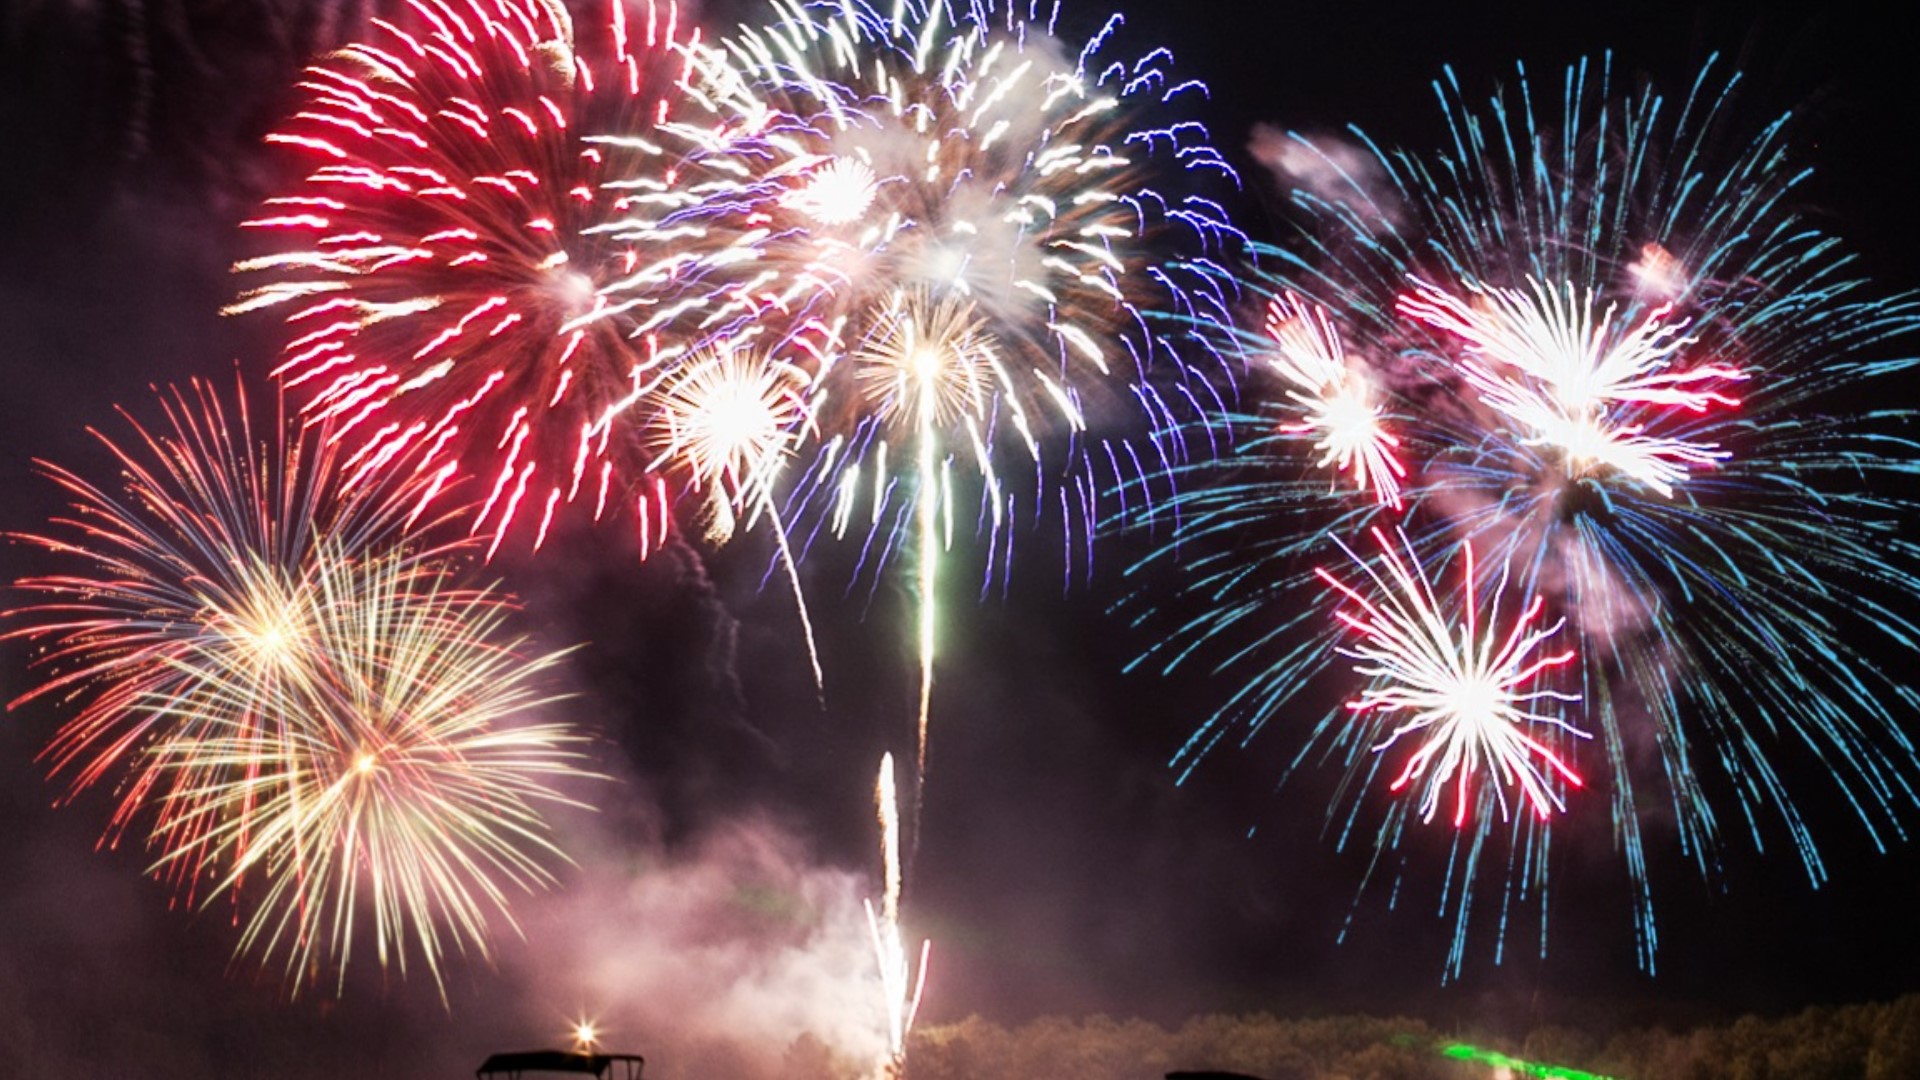 Watch all of the fireworks that capped the 2022 4th of July Celebration on Lake Murray.